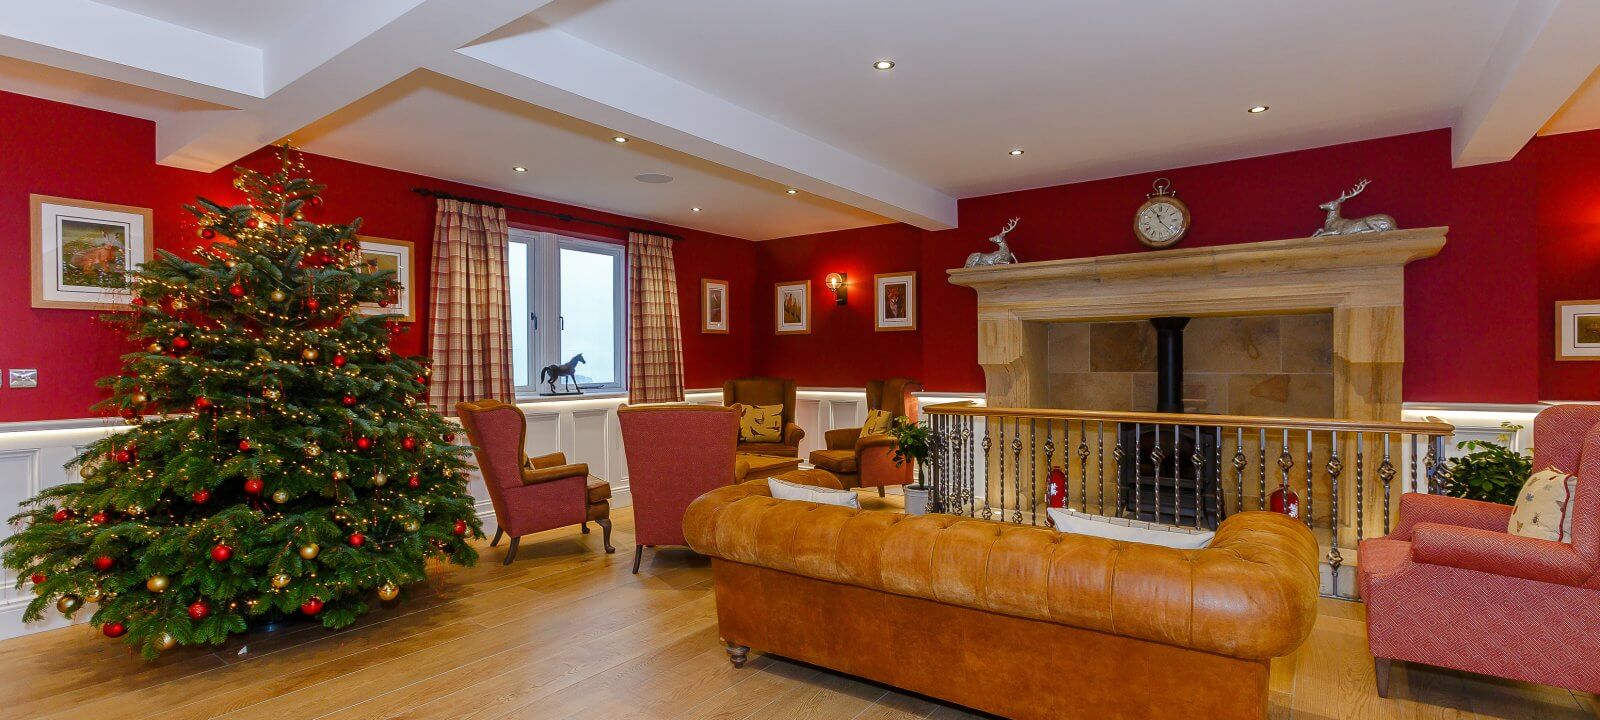 Christmas tree in hall with fireplace